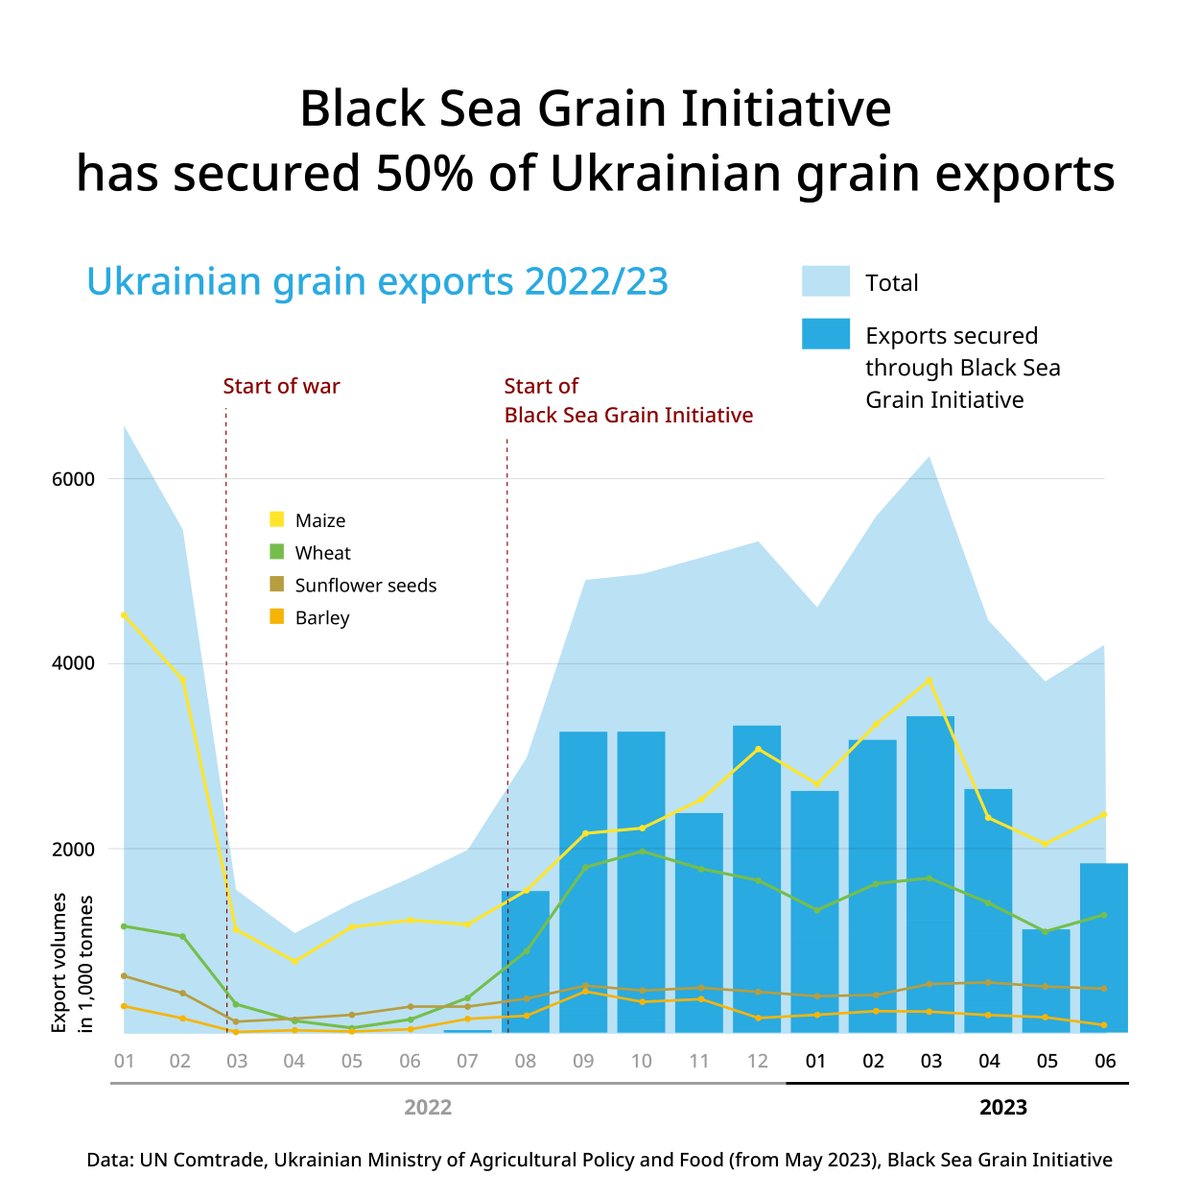 🇷🇺 invasion of #Ukraine has worsened the #foodcrisis. 🇺🇦 is the leading grain exporter. Since the war, 🇺🇦 #grainexports have fallen, thus #EU countries are assisting those in need to cope with increased food prices. #BSGI exported 50% of 🇺🇦 's grain.